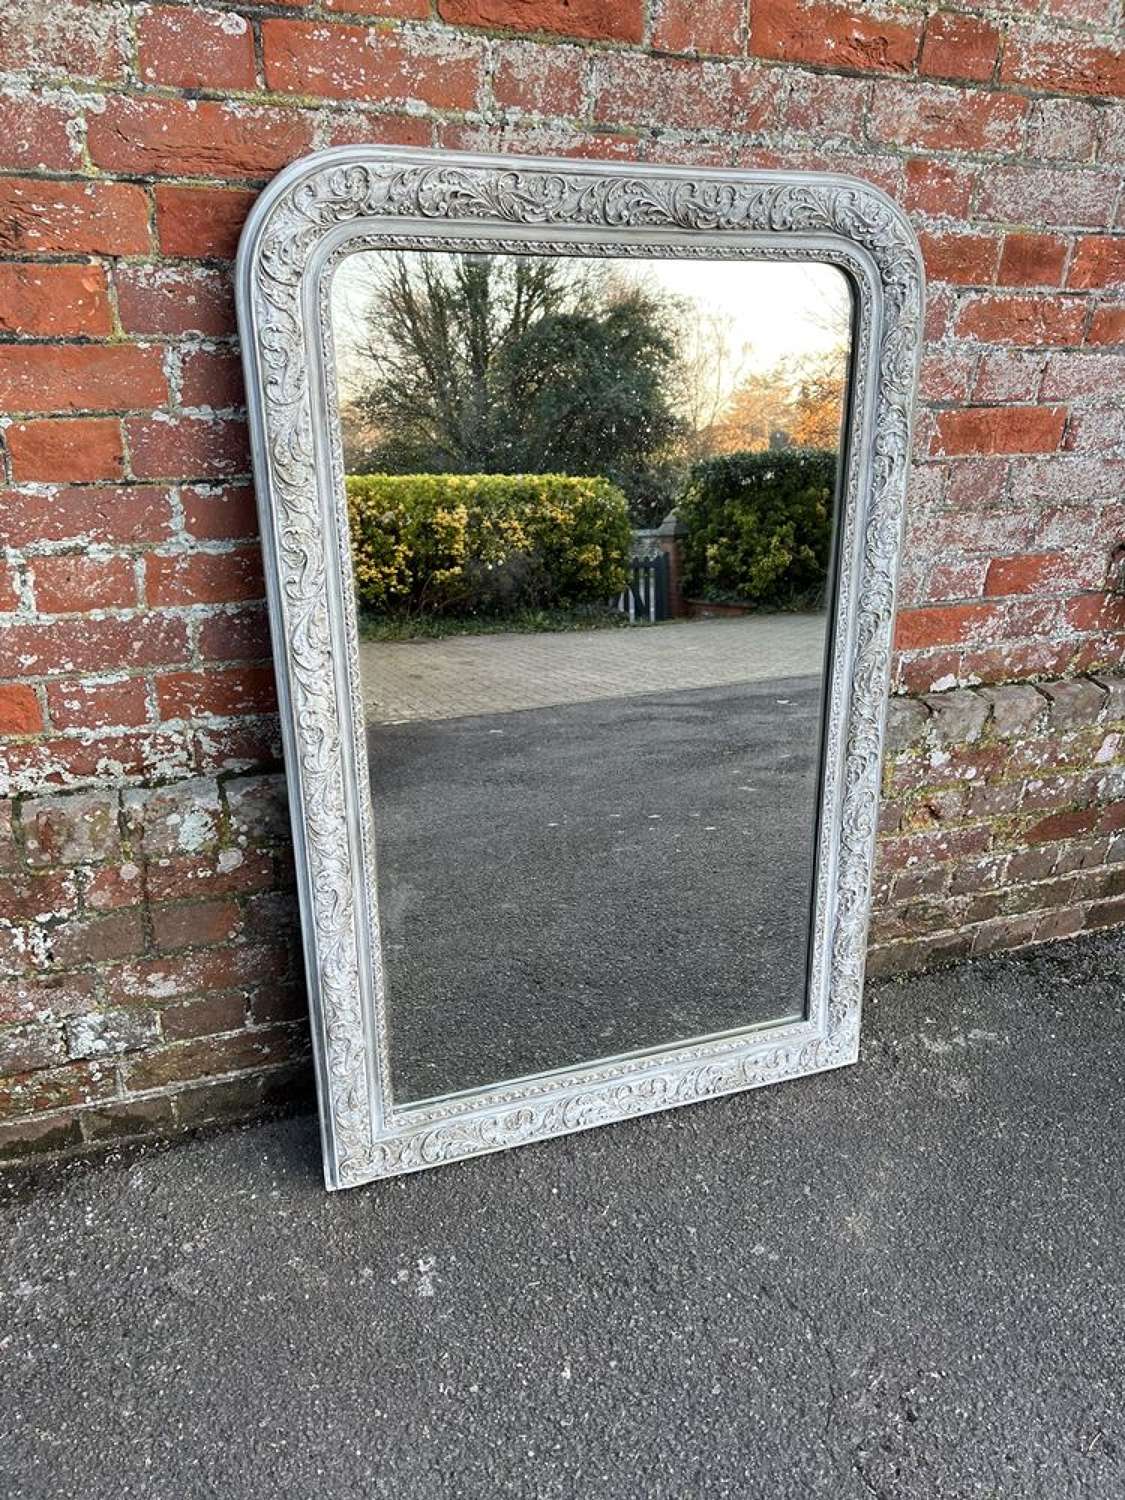 A Superb large Antique French 19th C arched top painted Mirror.